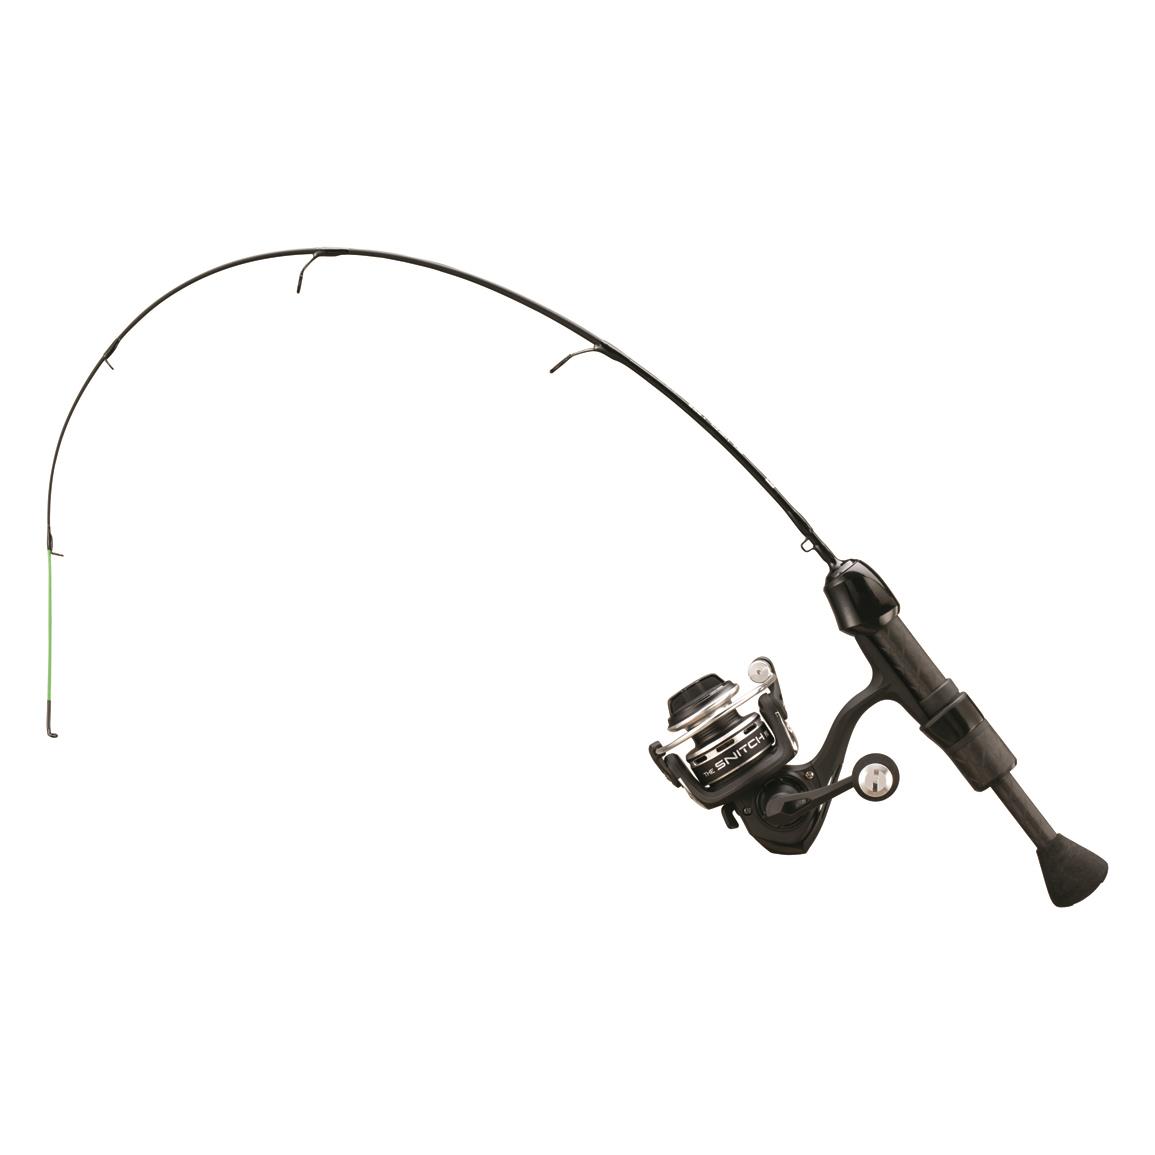 Ugly Stick® Carbon Series Baitcasting Rod and Reel Combo - 715403 ...